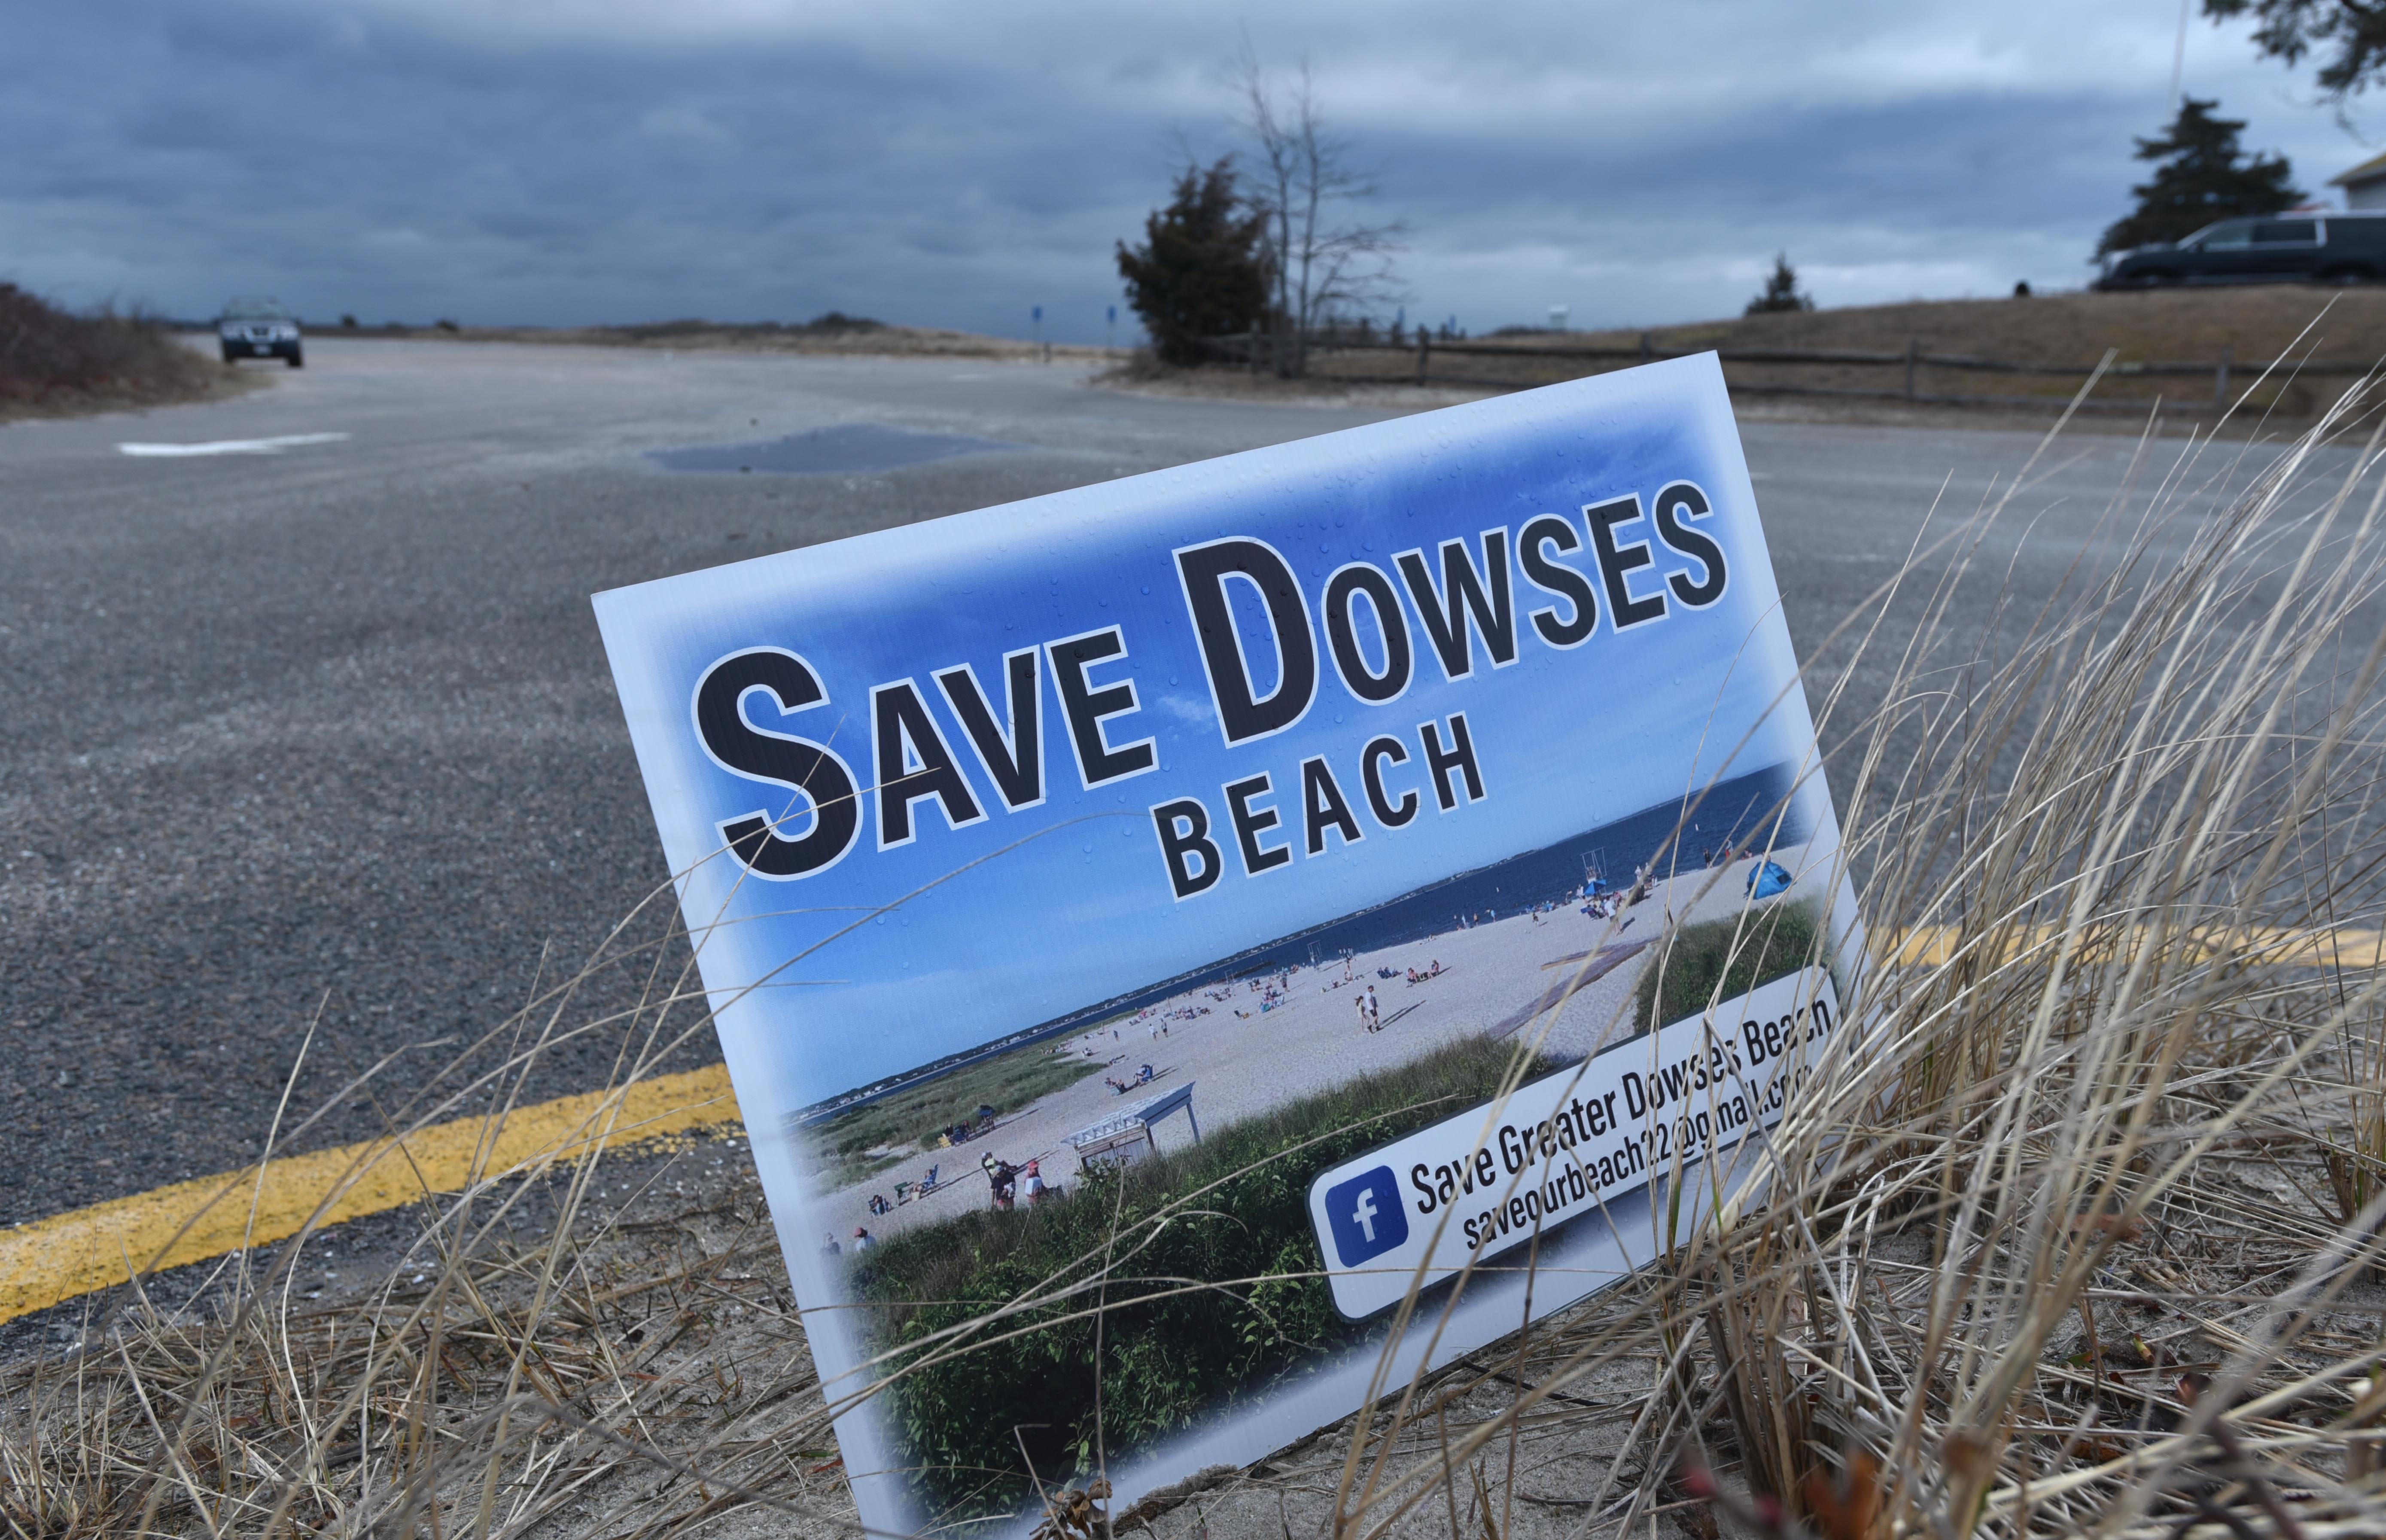 A "Save Dowes Beach" sign flutters in a strong north wind on Wednesday at the entrance to Dowses Beach in Osterville, the landfall location for the proposed offshore wind farm Commonwealth Wind. A group opposed to using the beach for the cable landfall has posted signs around the village.